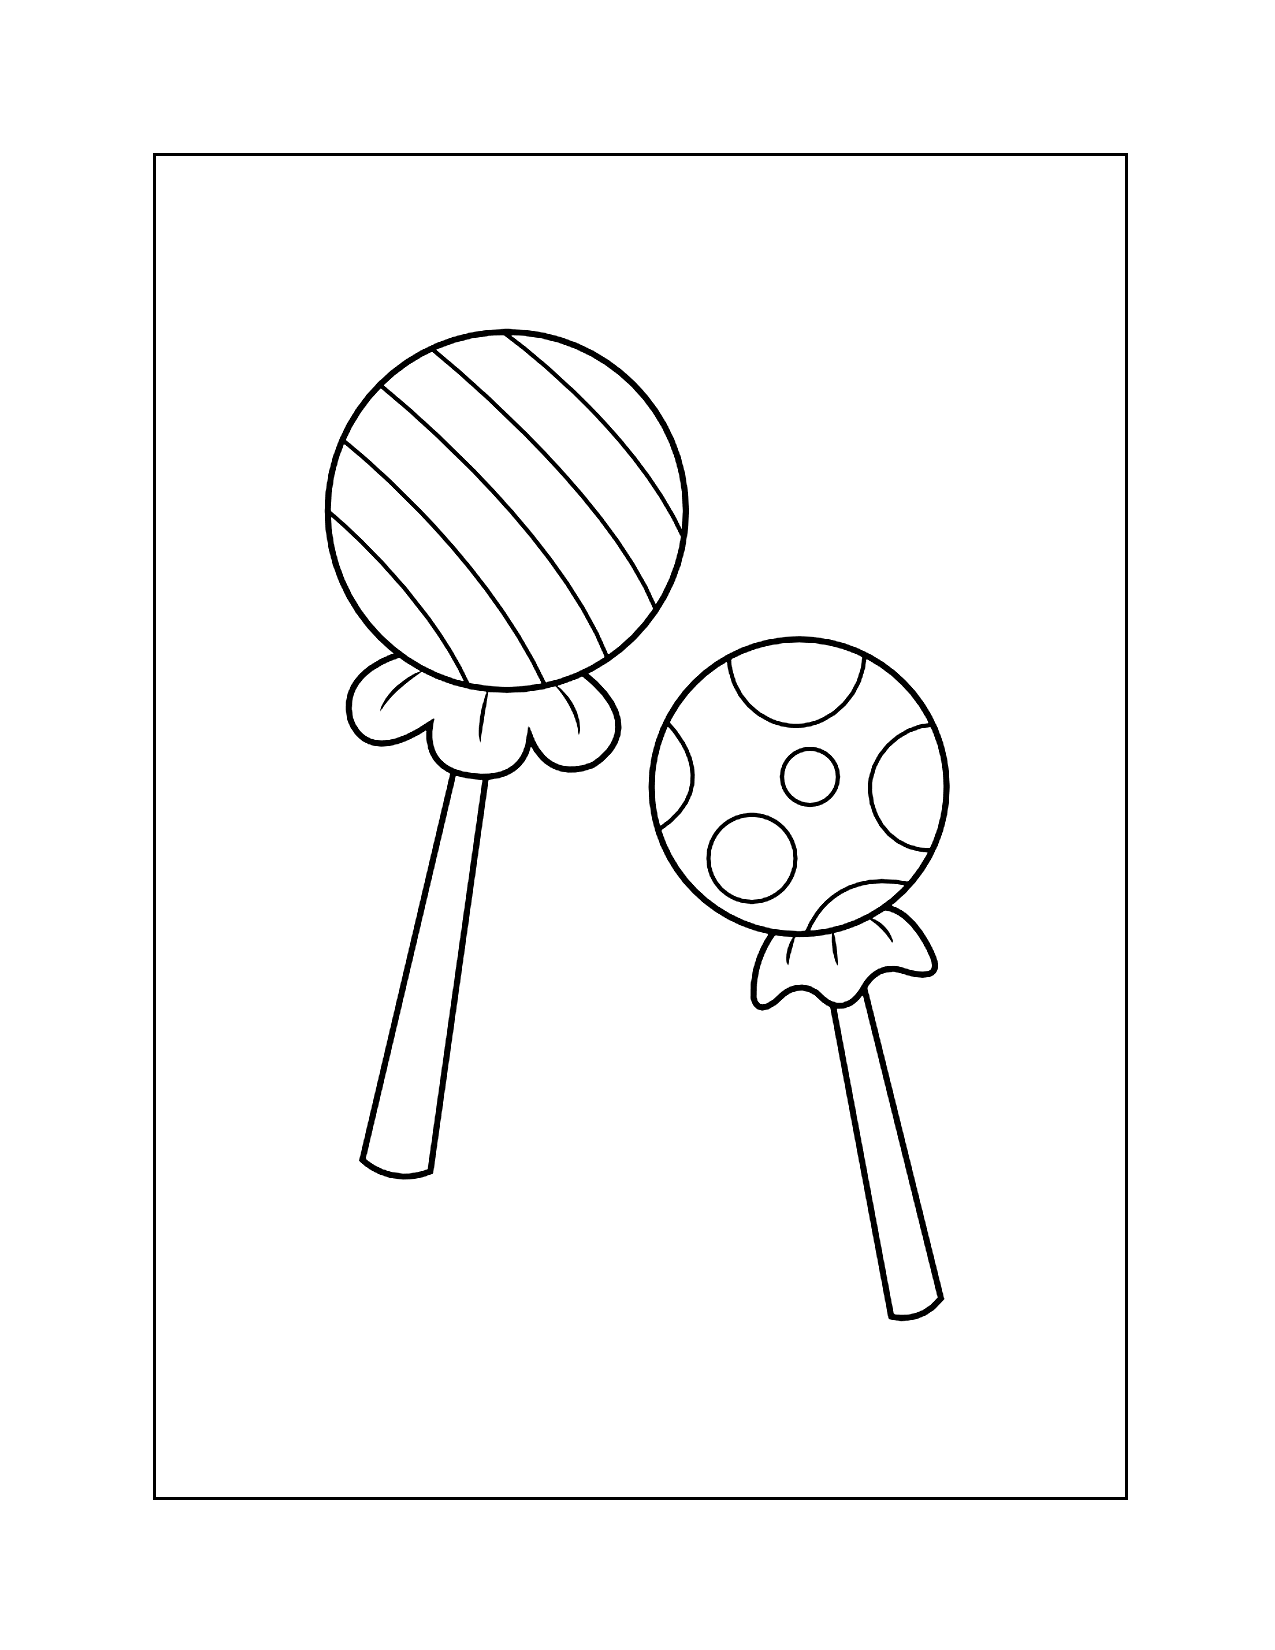 Sucker Candy Coloring Page